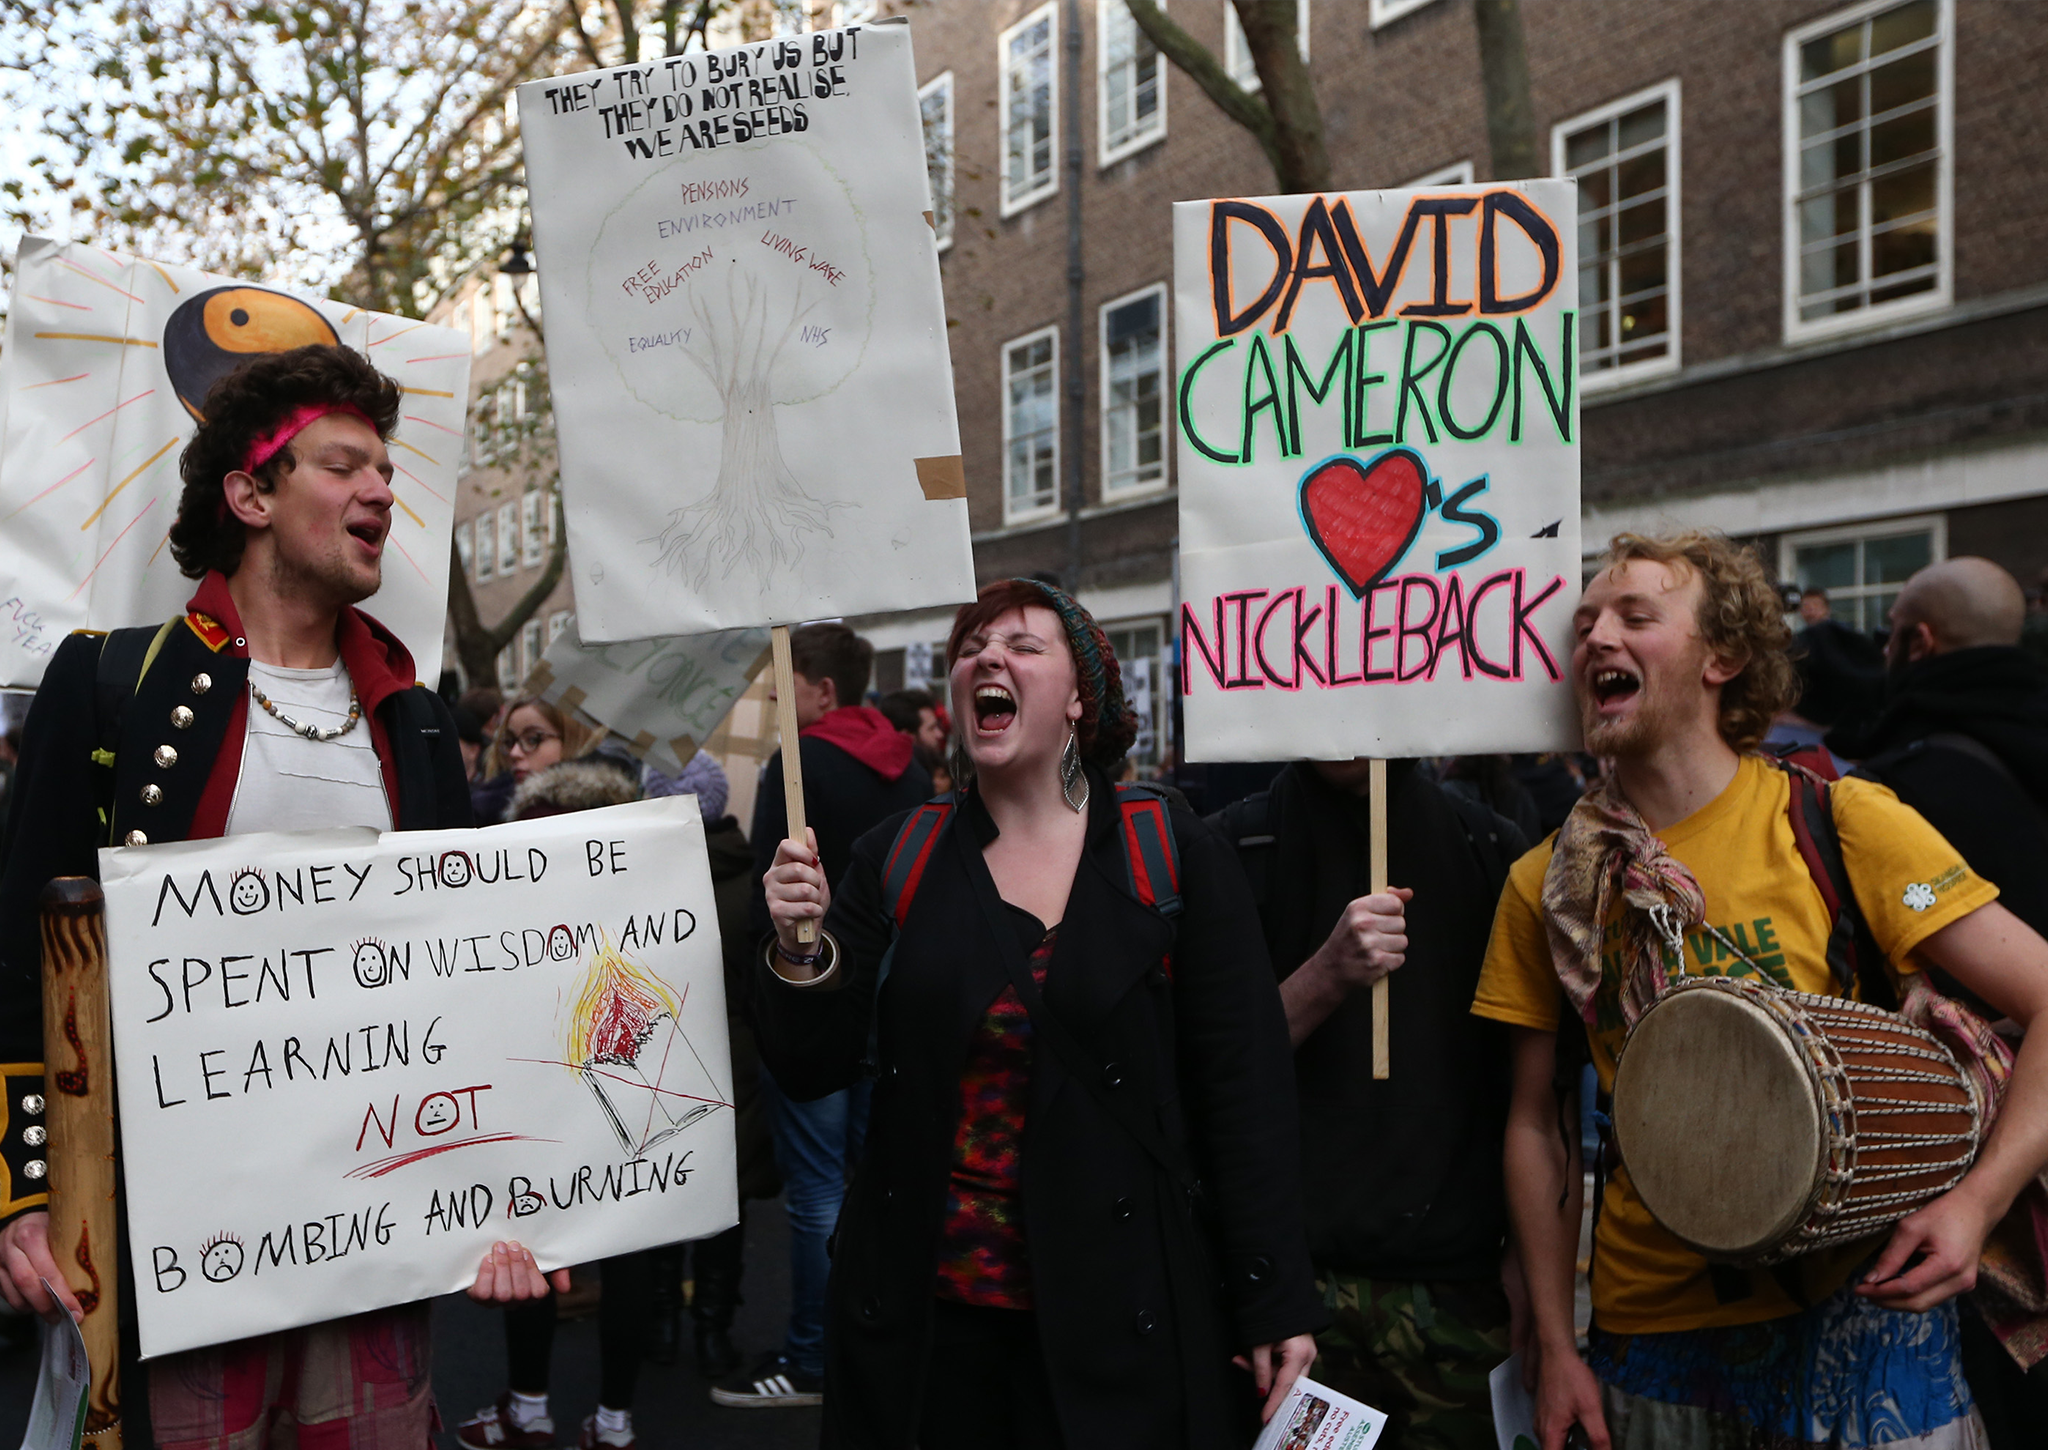 Students take part in a protest march against fees and cuts in the education system